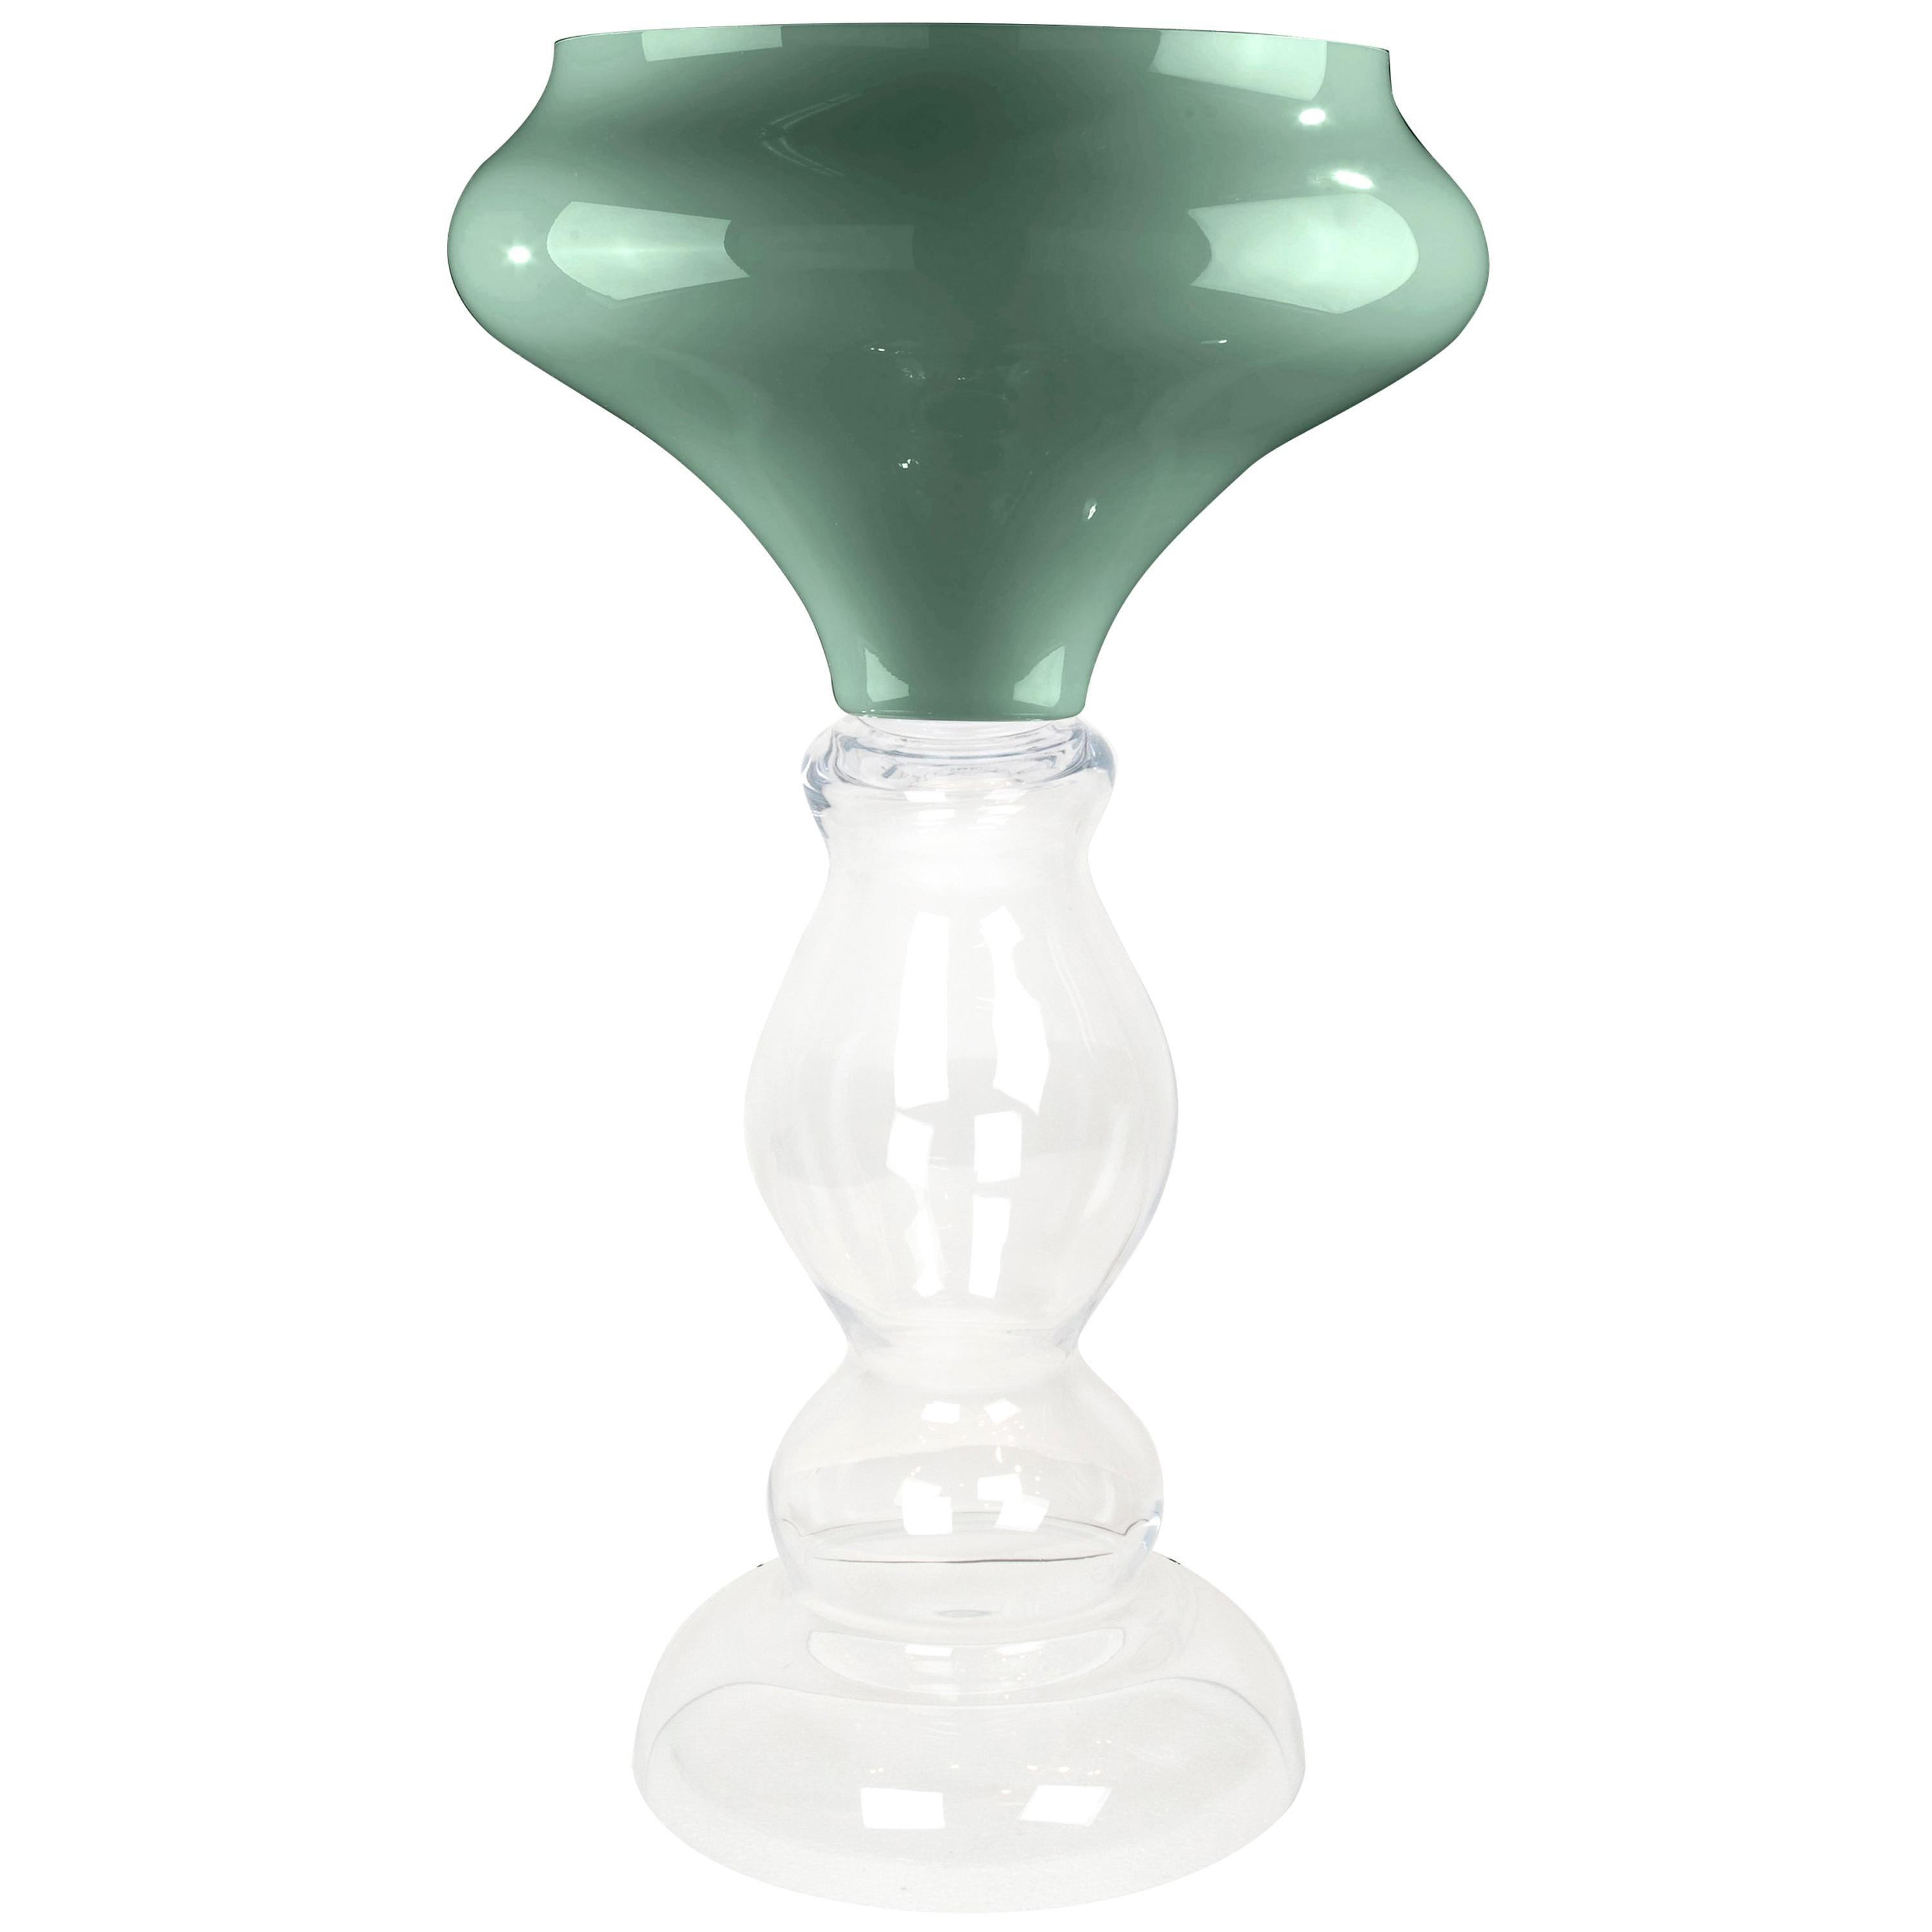 Vase Zeus, Neo Mint, 2020 Trend, and Clear Color, in Glass, Italy For Sale